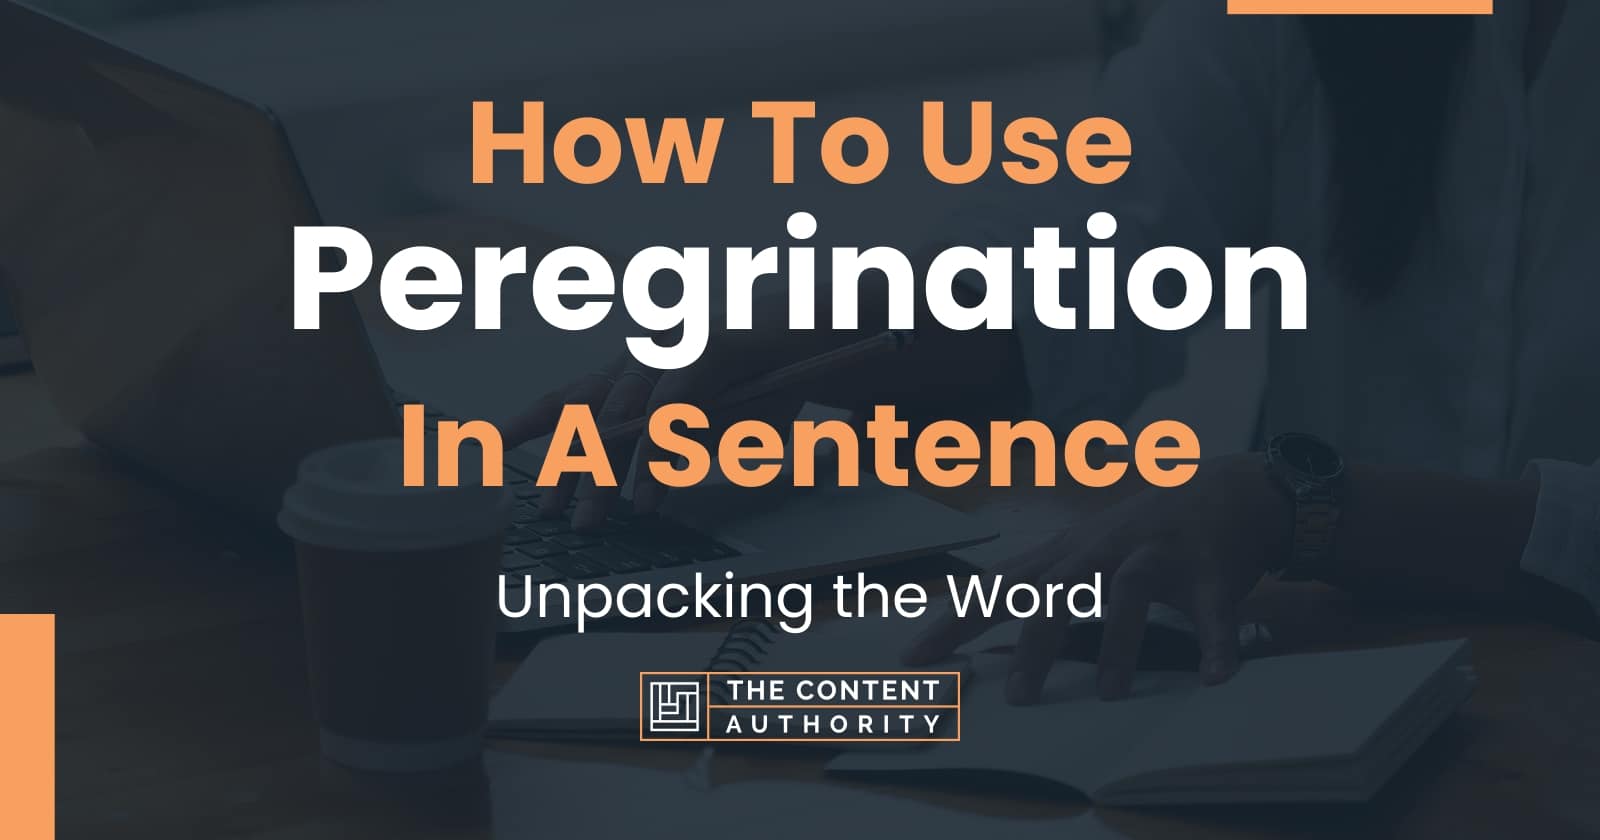 peregrination meaning and sentence